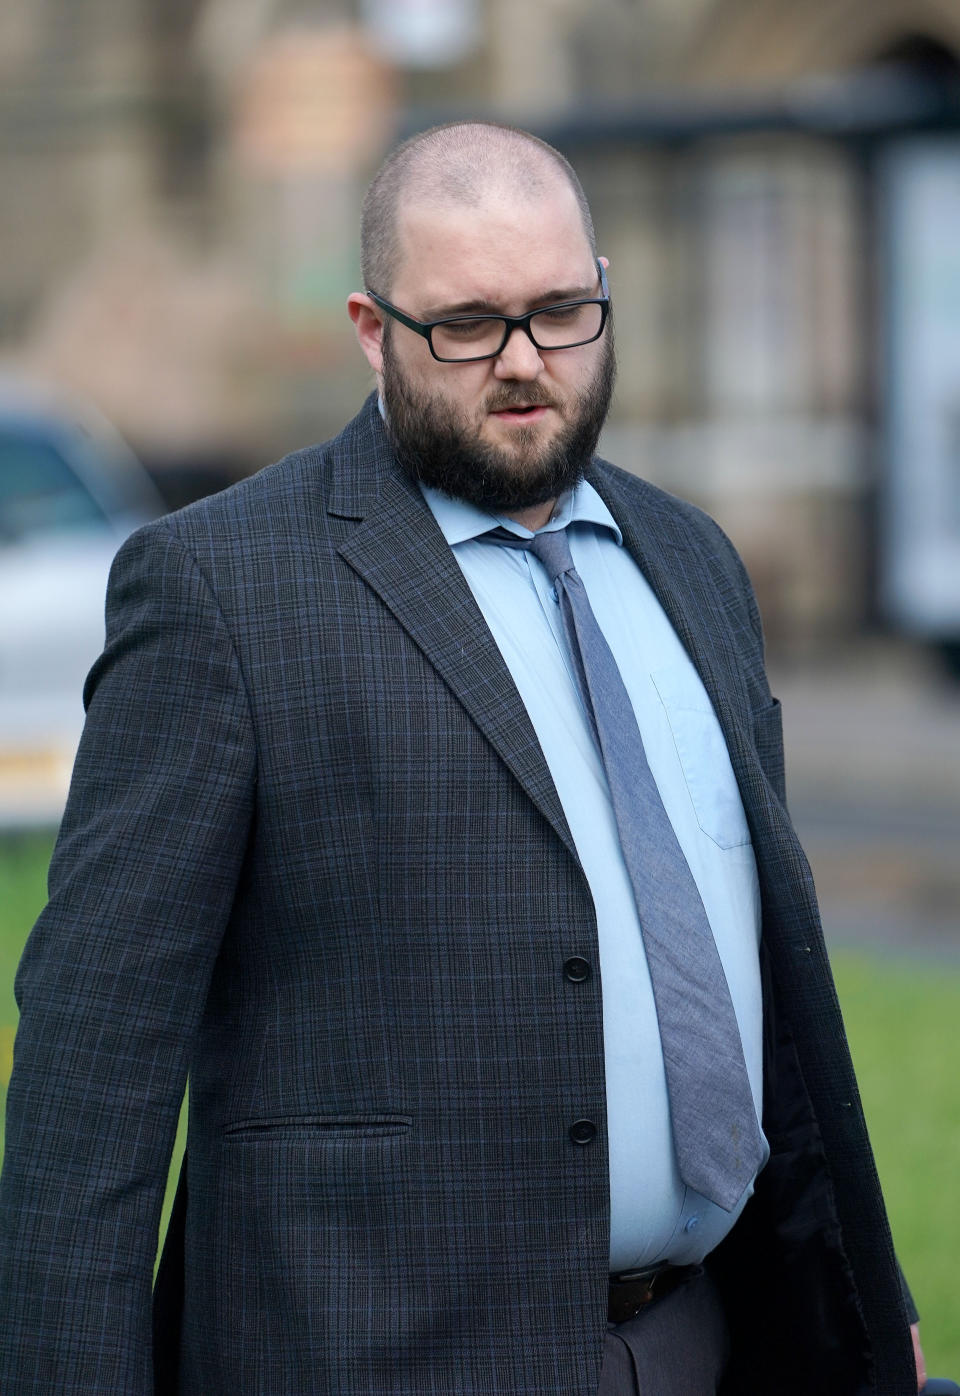 Paul Crowther arrives at North Tyneside Magistrates' Court in North Shields where he faces charges of common assault and criminal damage after throwing a milkshake at Nigel Farage during a city centre walkabout.